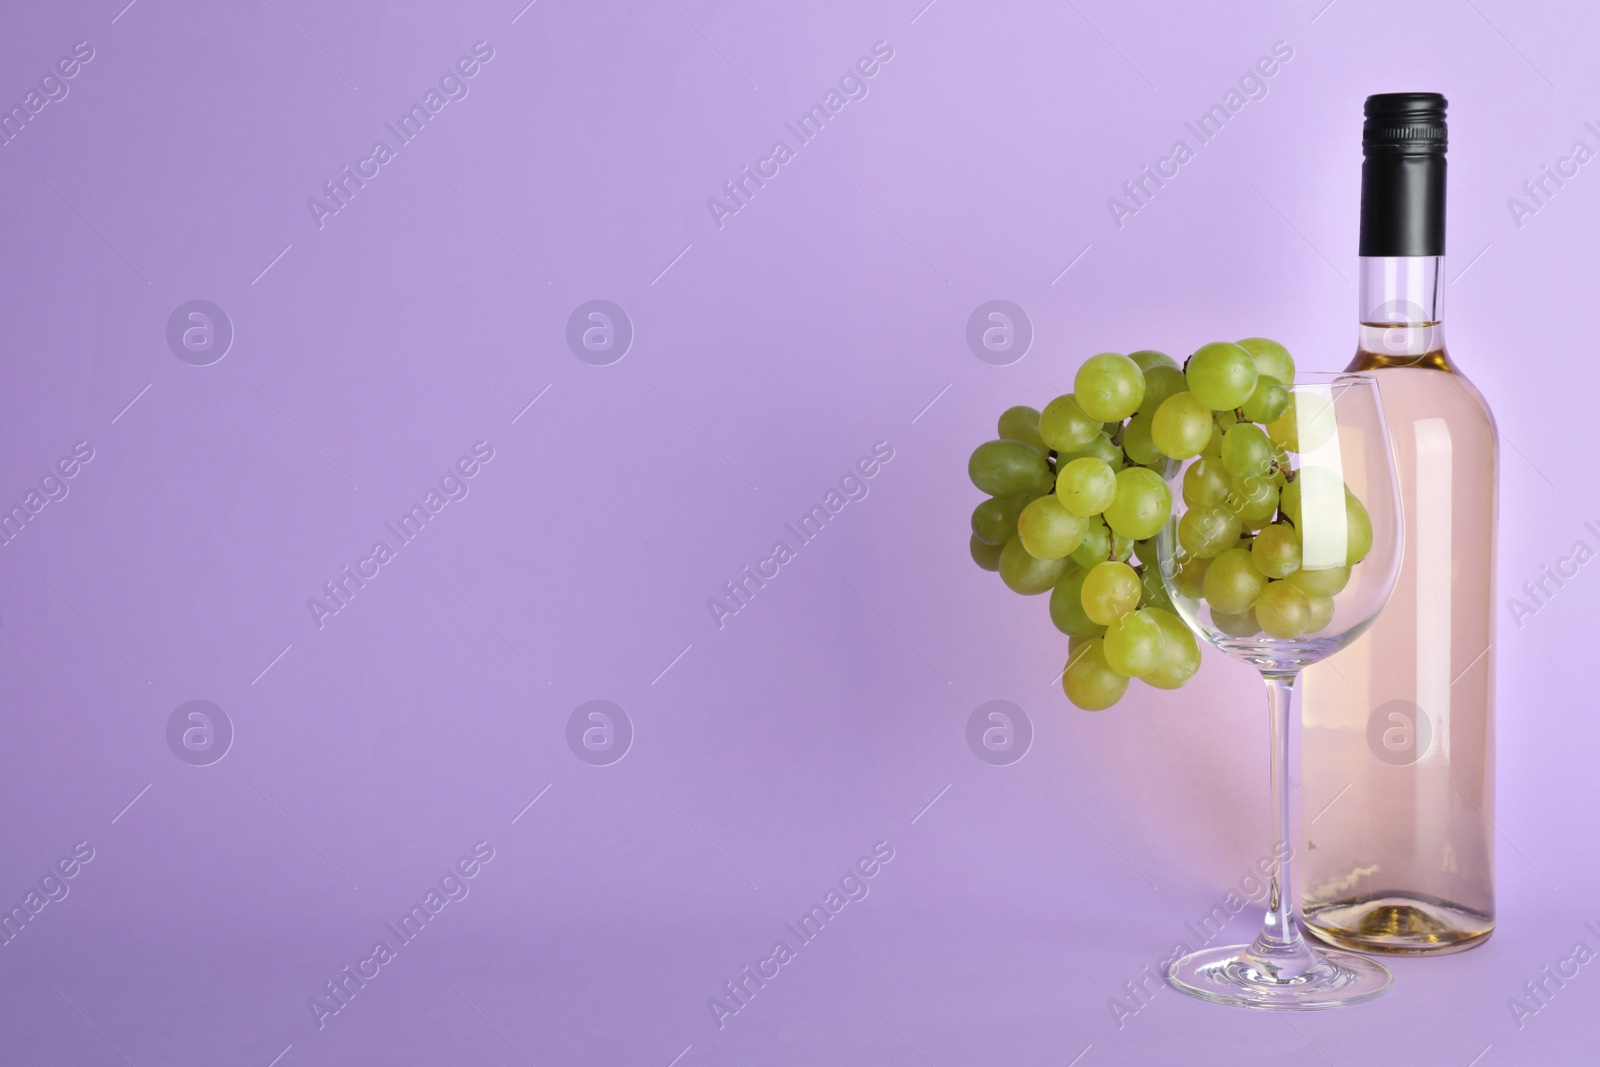 Photo of Bunch of grapes in glass near wine bottle on lilac background. Space for text